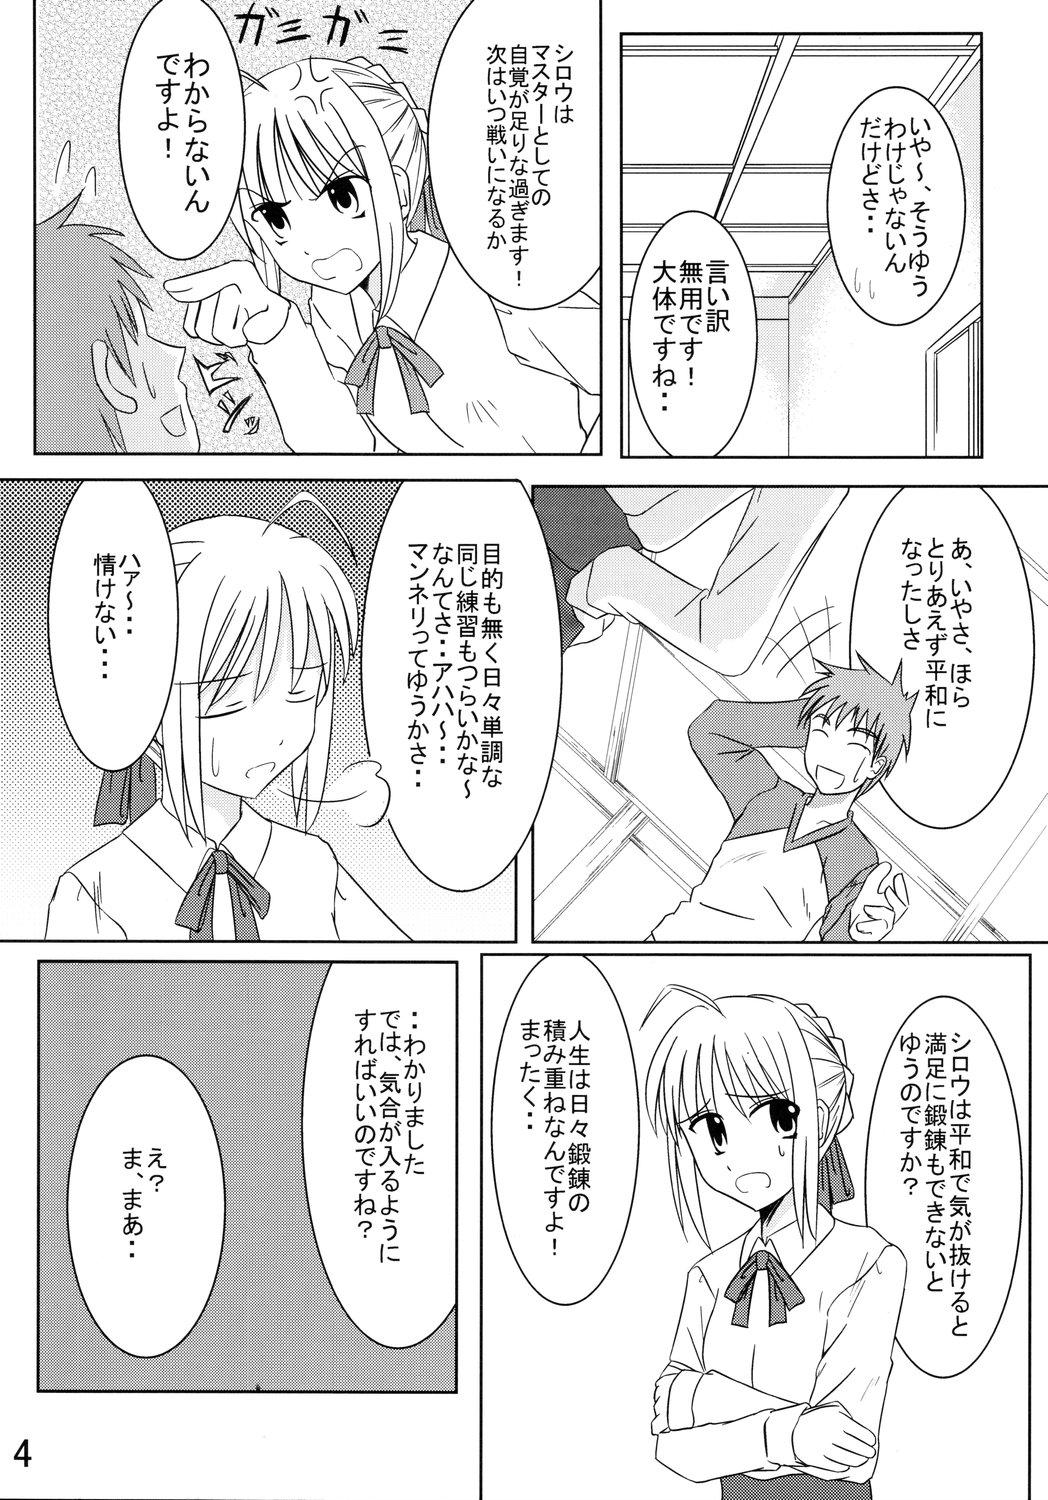 Bisex Saber Of Sanity - Fate stay night Handsome - Page 3